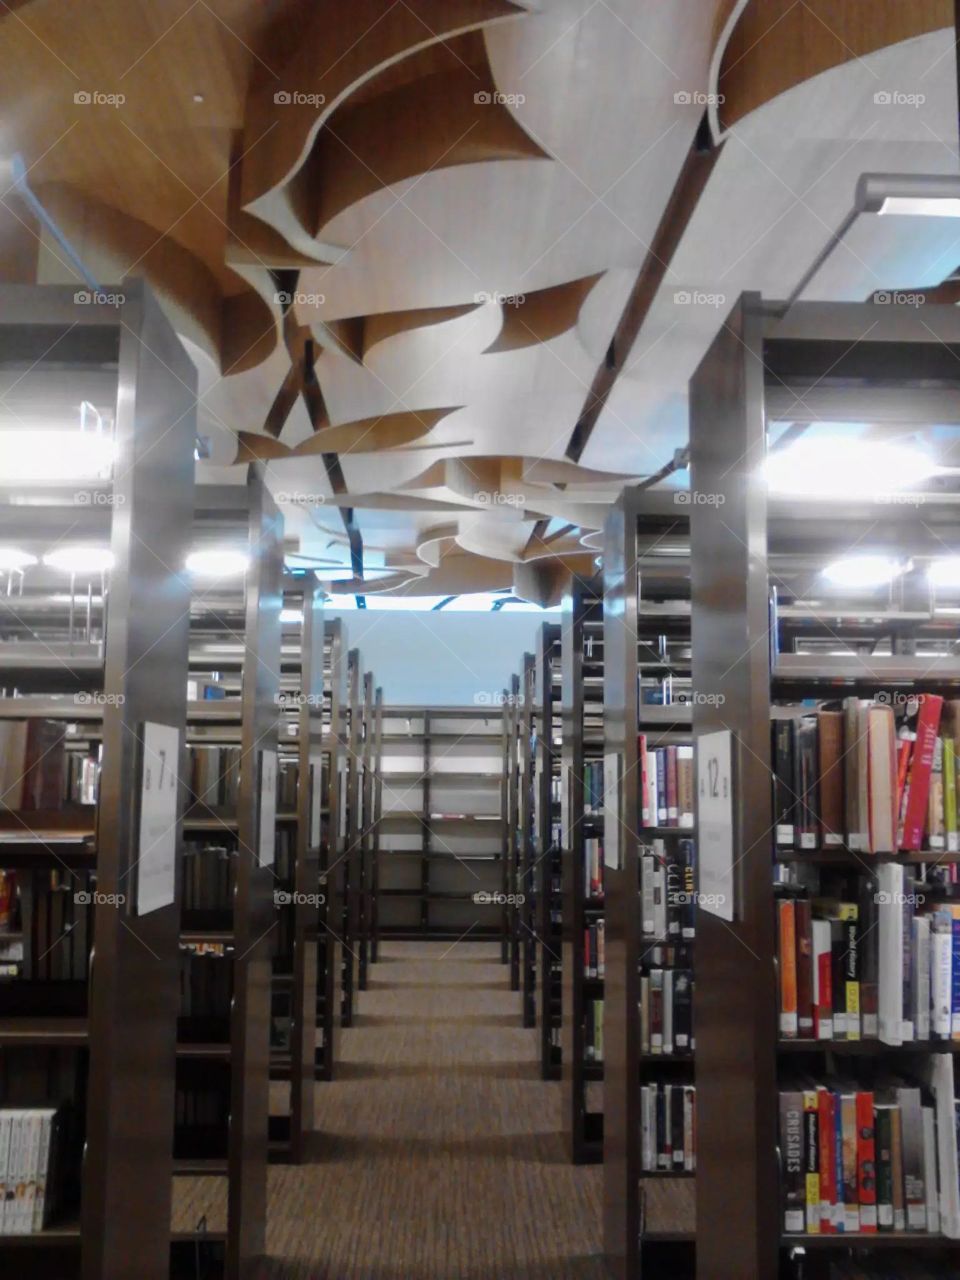 Aisles in a library.